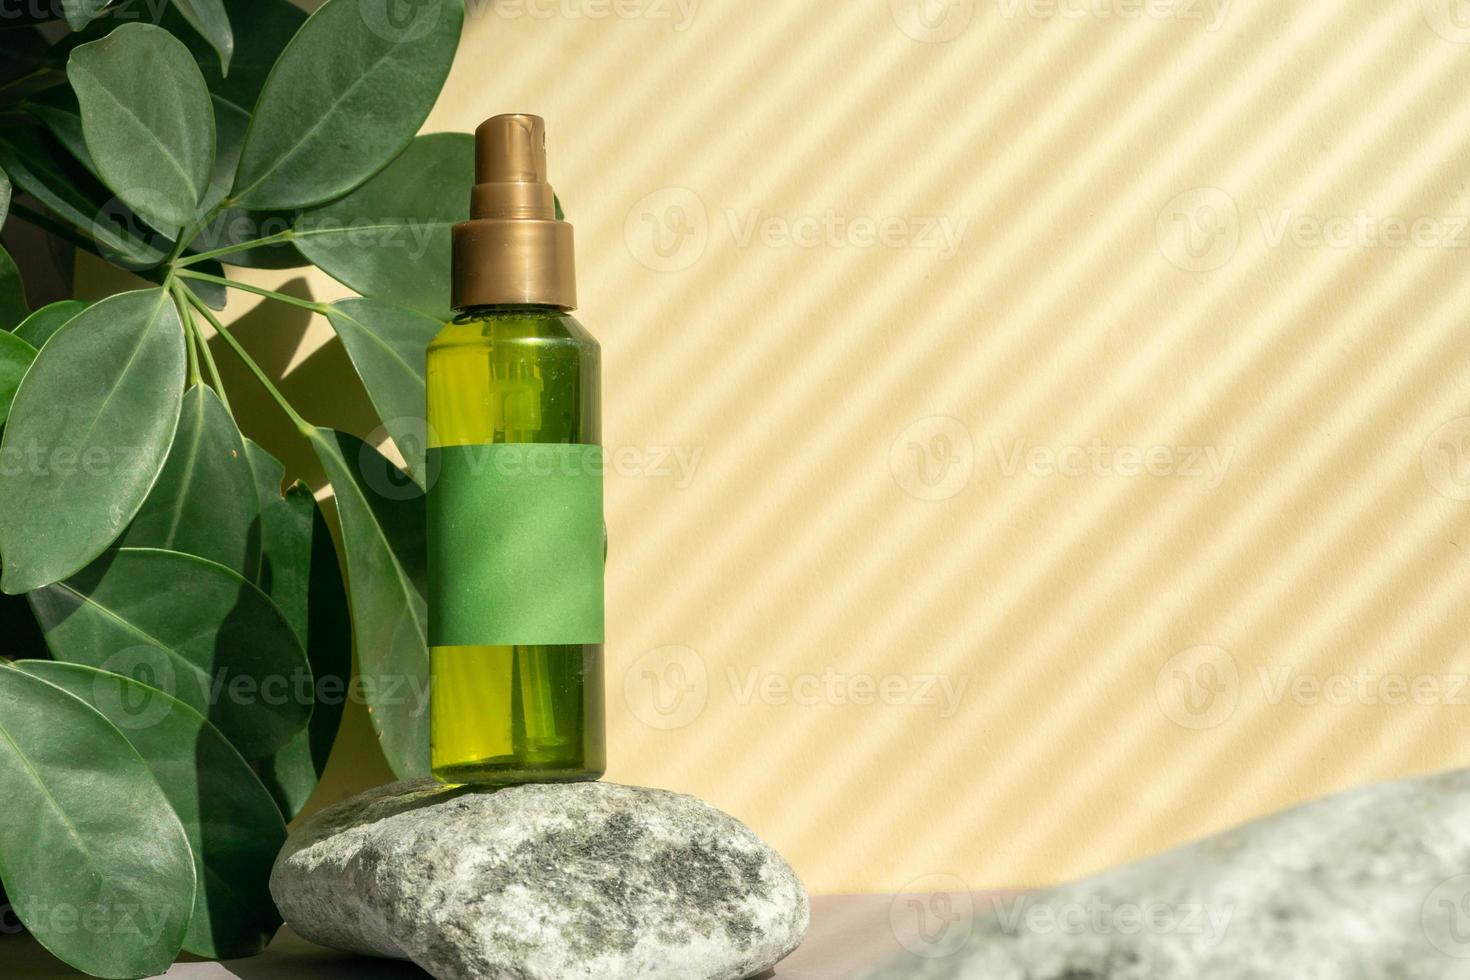 A bottle of green color with a spray bottle lies on the stones, next to the green leaves photo